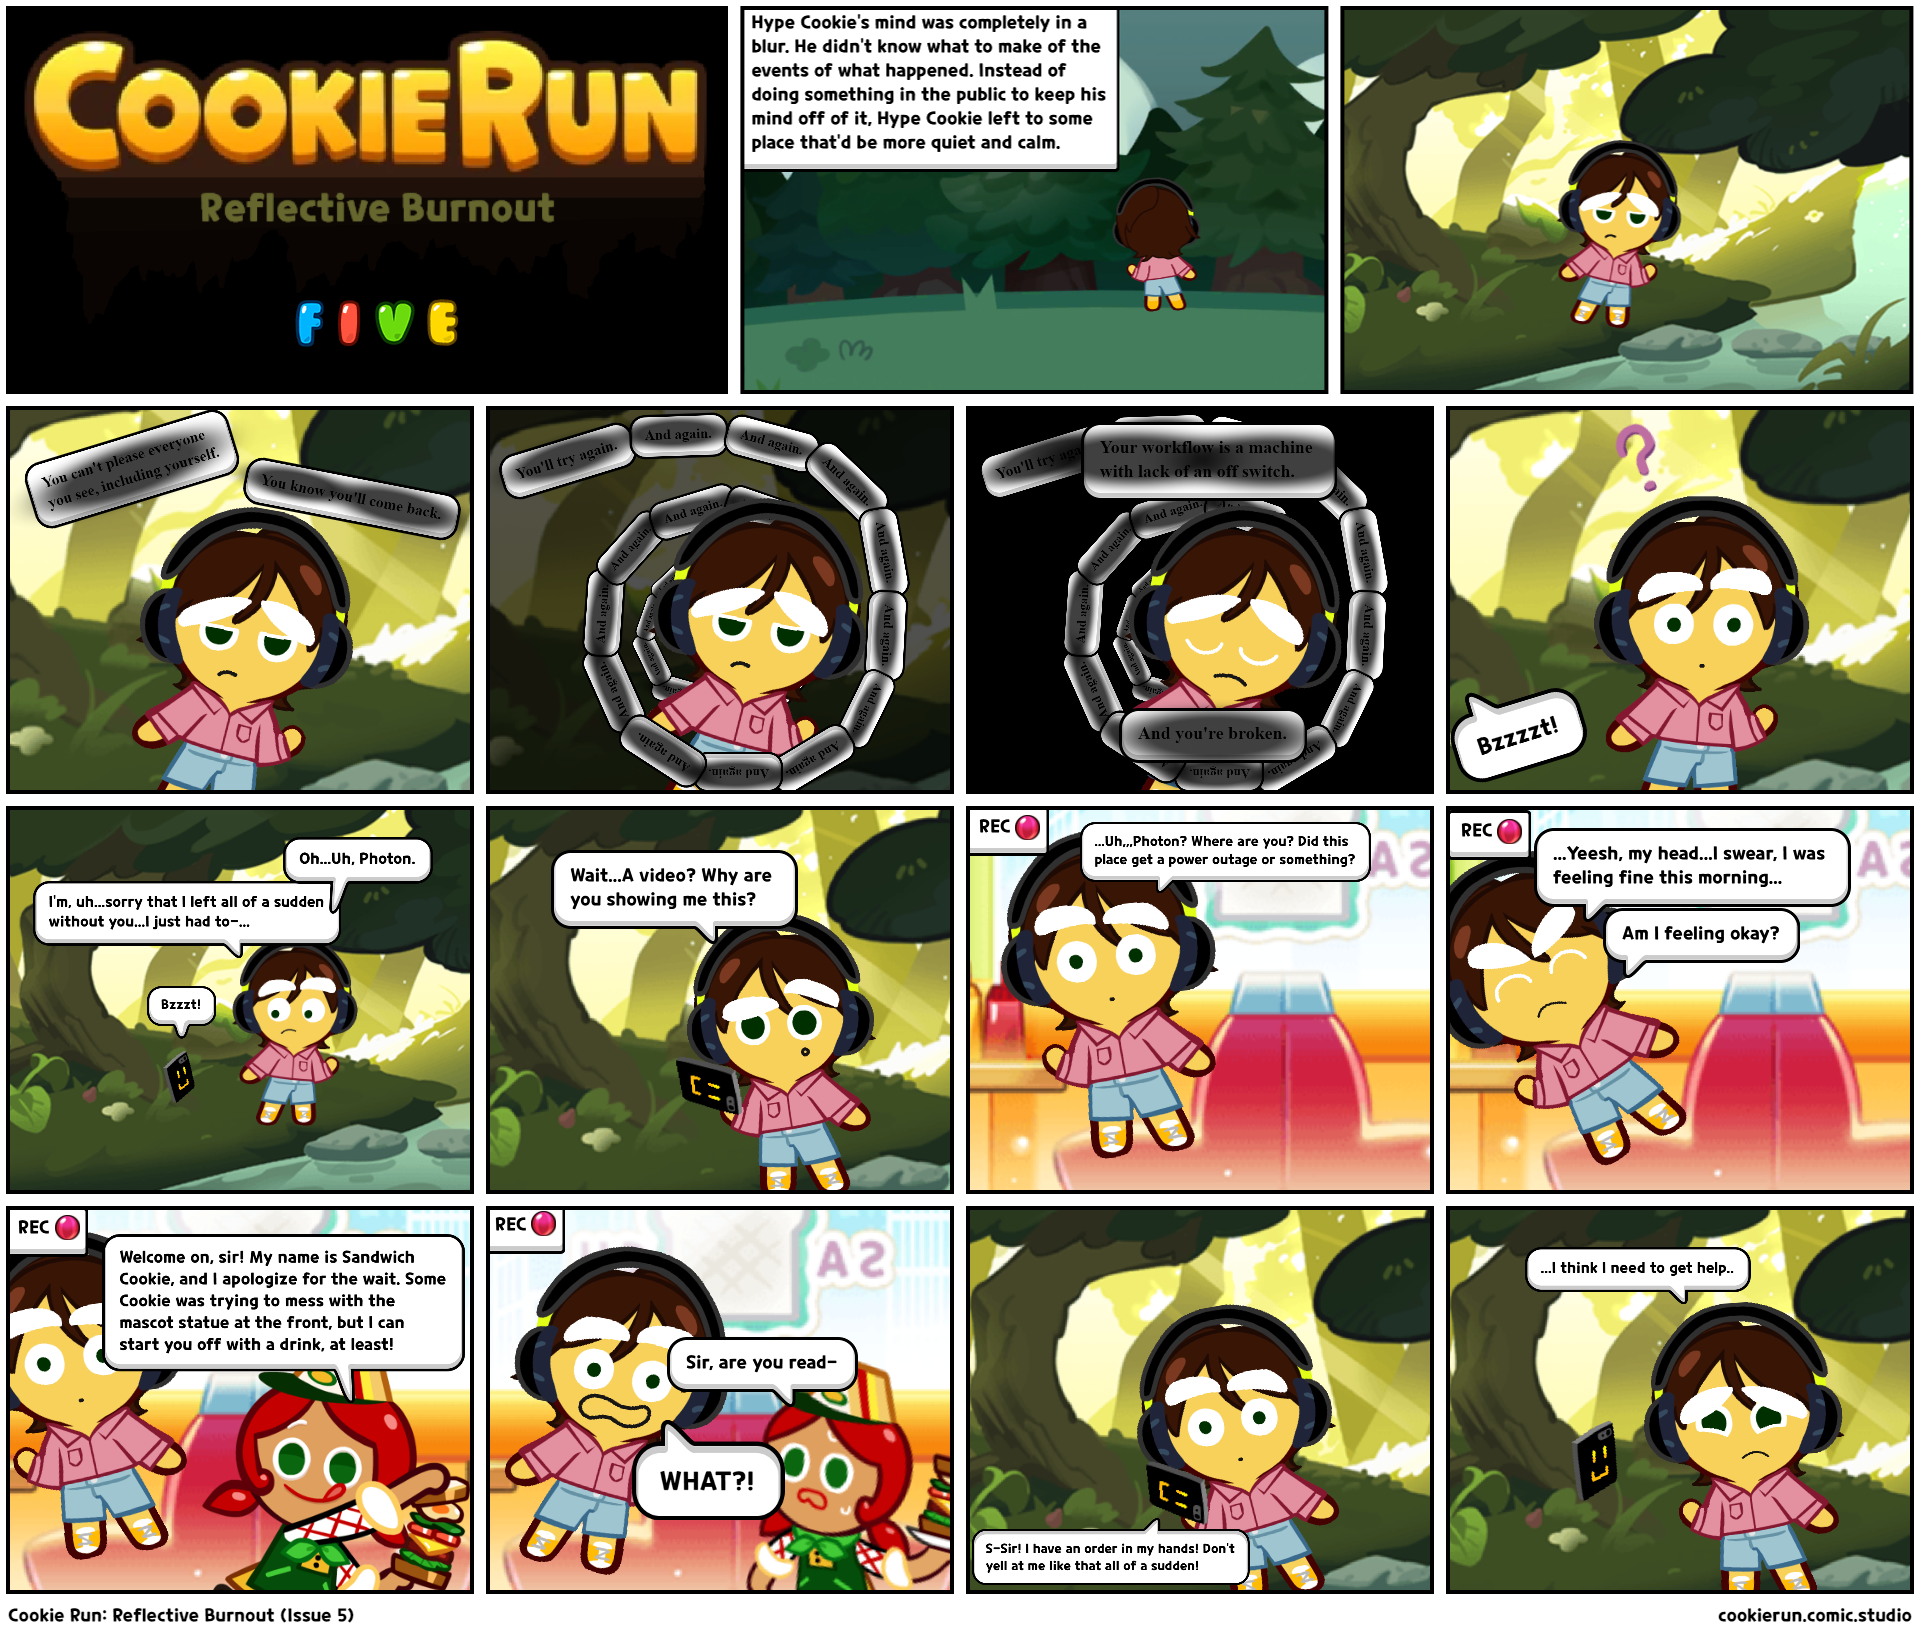 Cookie Run: Reflective Burnout (Issue 5)